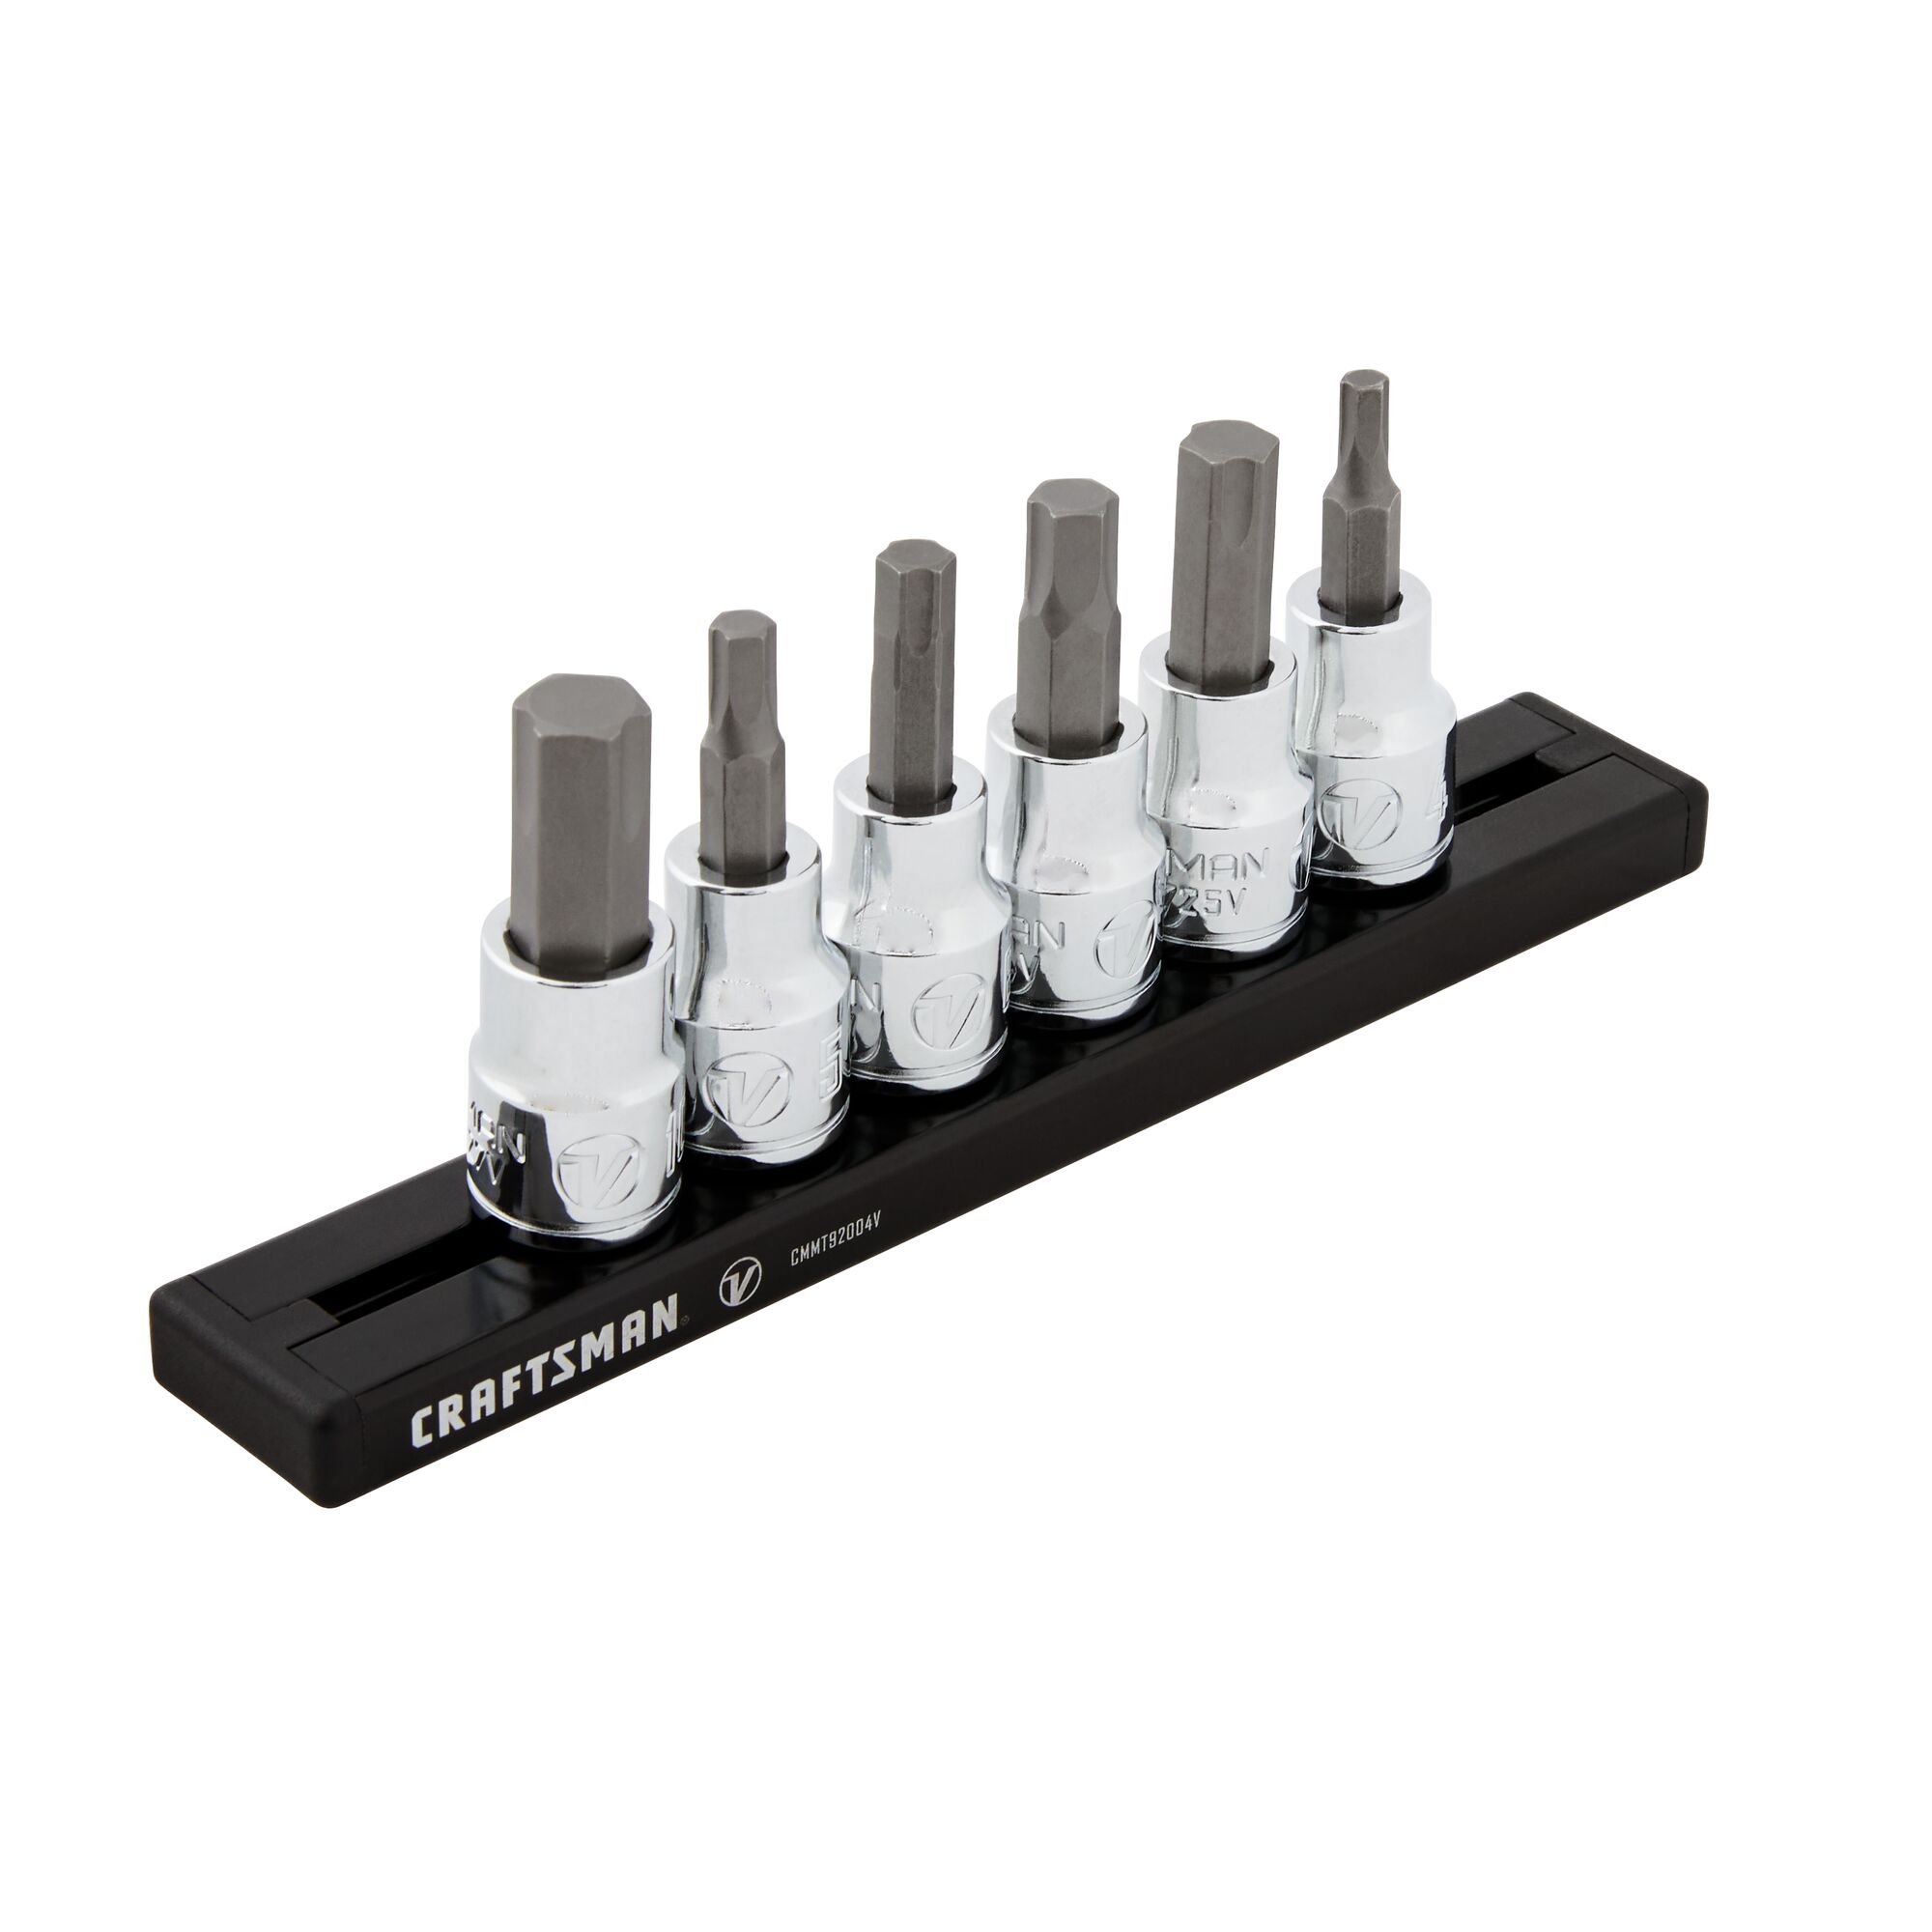 Right profile of 3 eighths inch drive metric x tract technology hex bit socket set 6 piece.